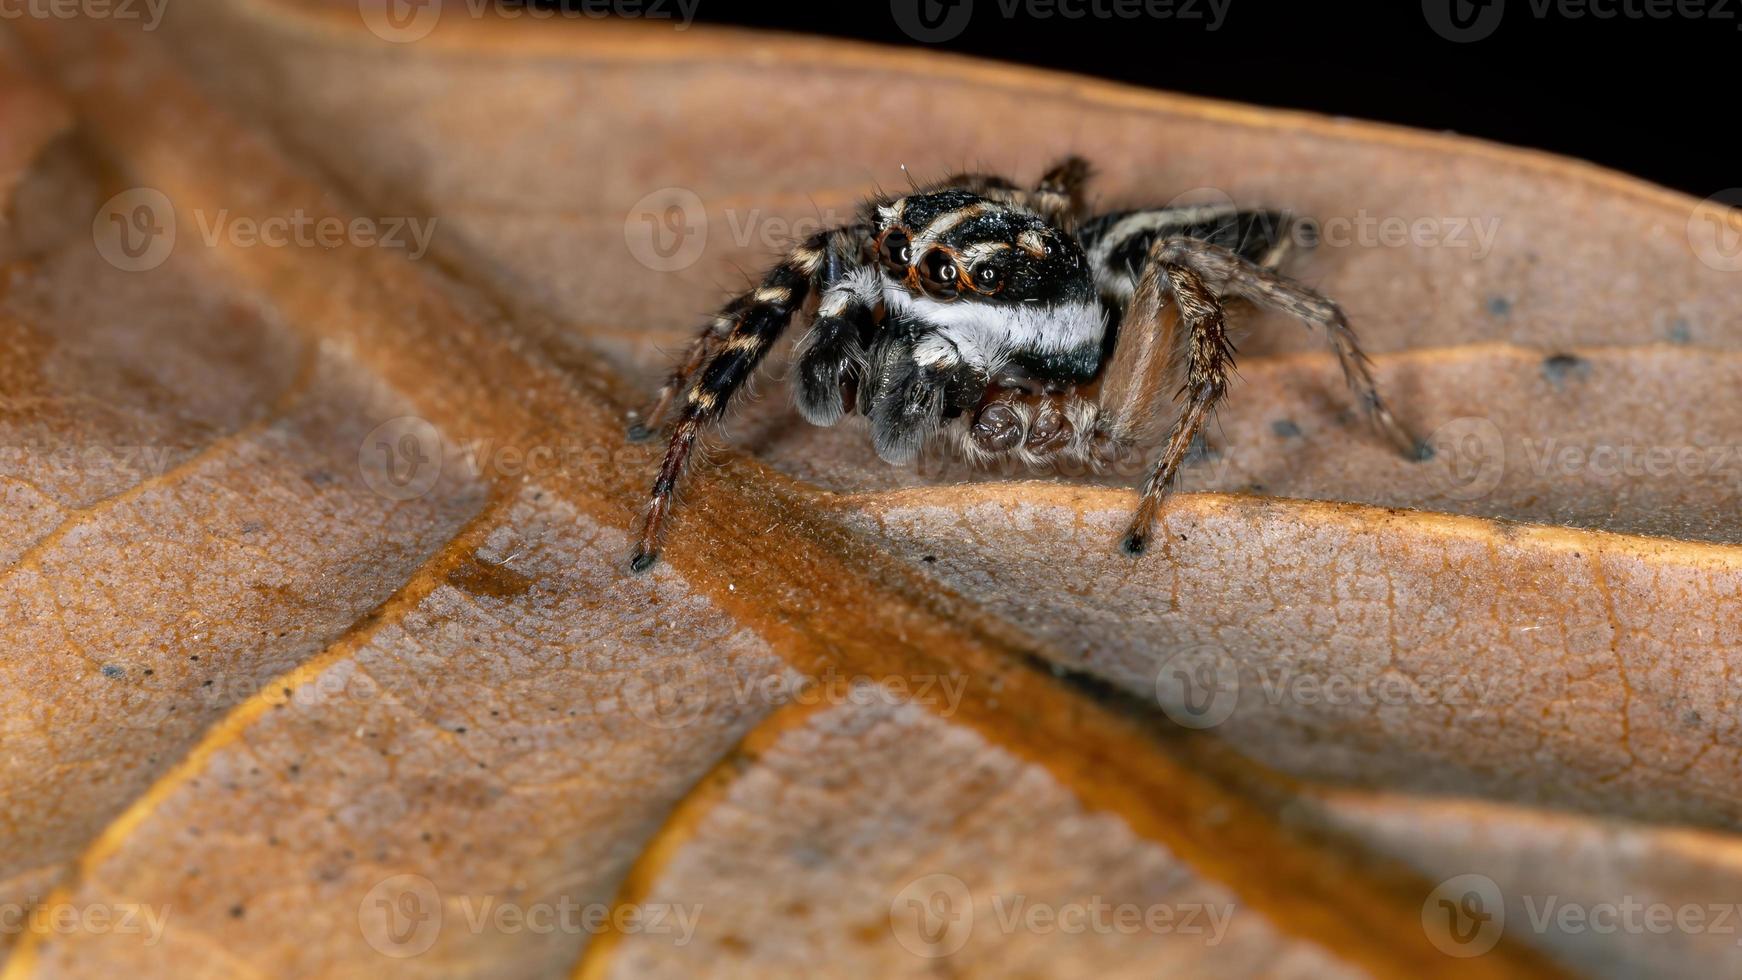 Adult Jumping Spider photo